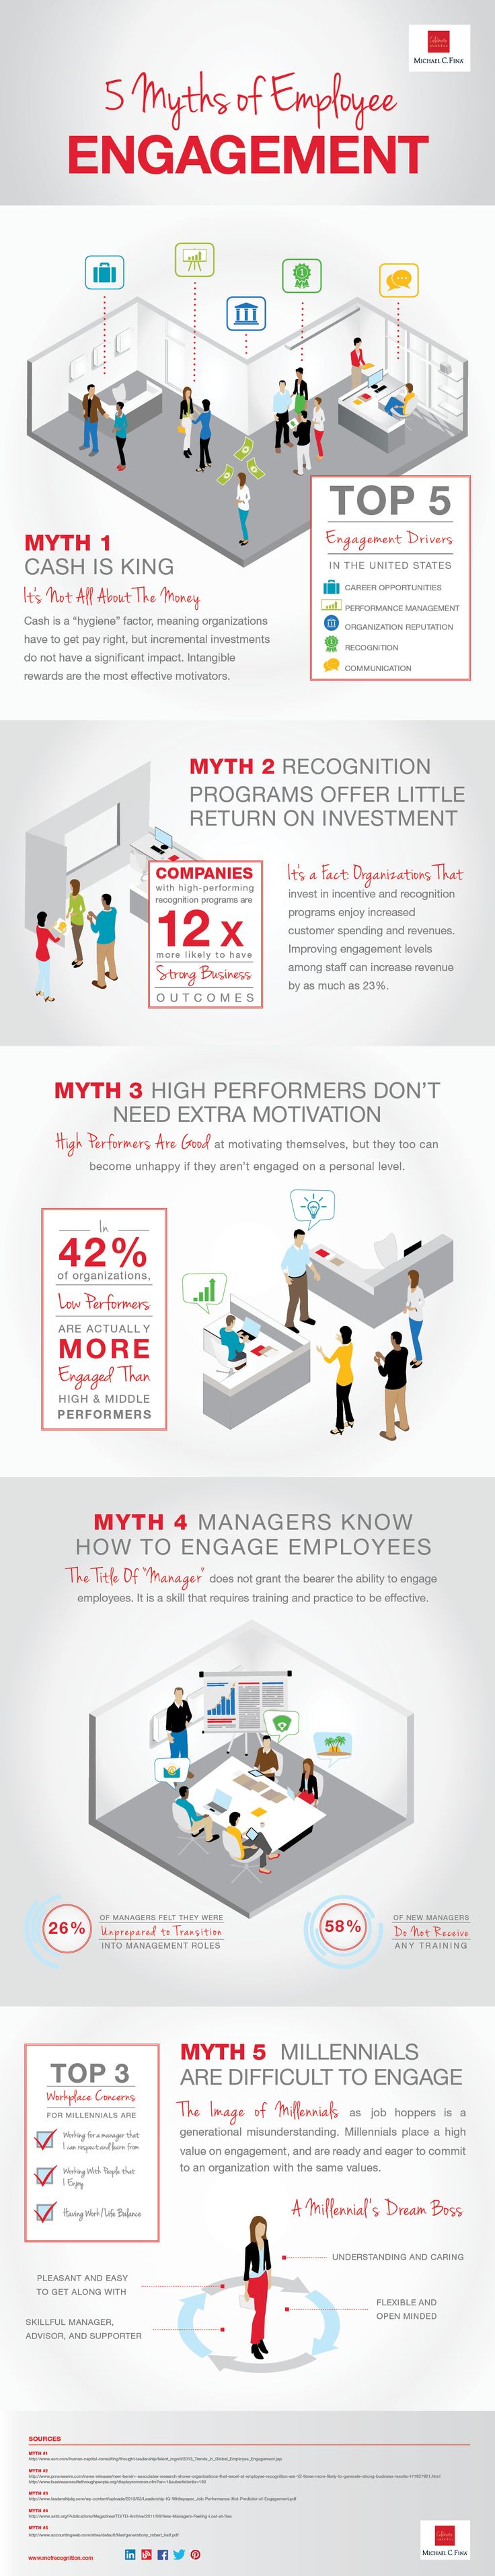 Top 5 myths of Employee Engagement #infographic (top one being that cash is king)